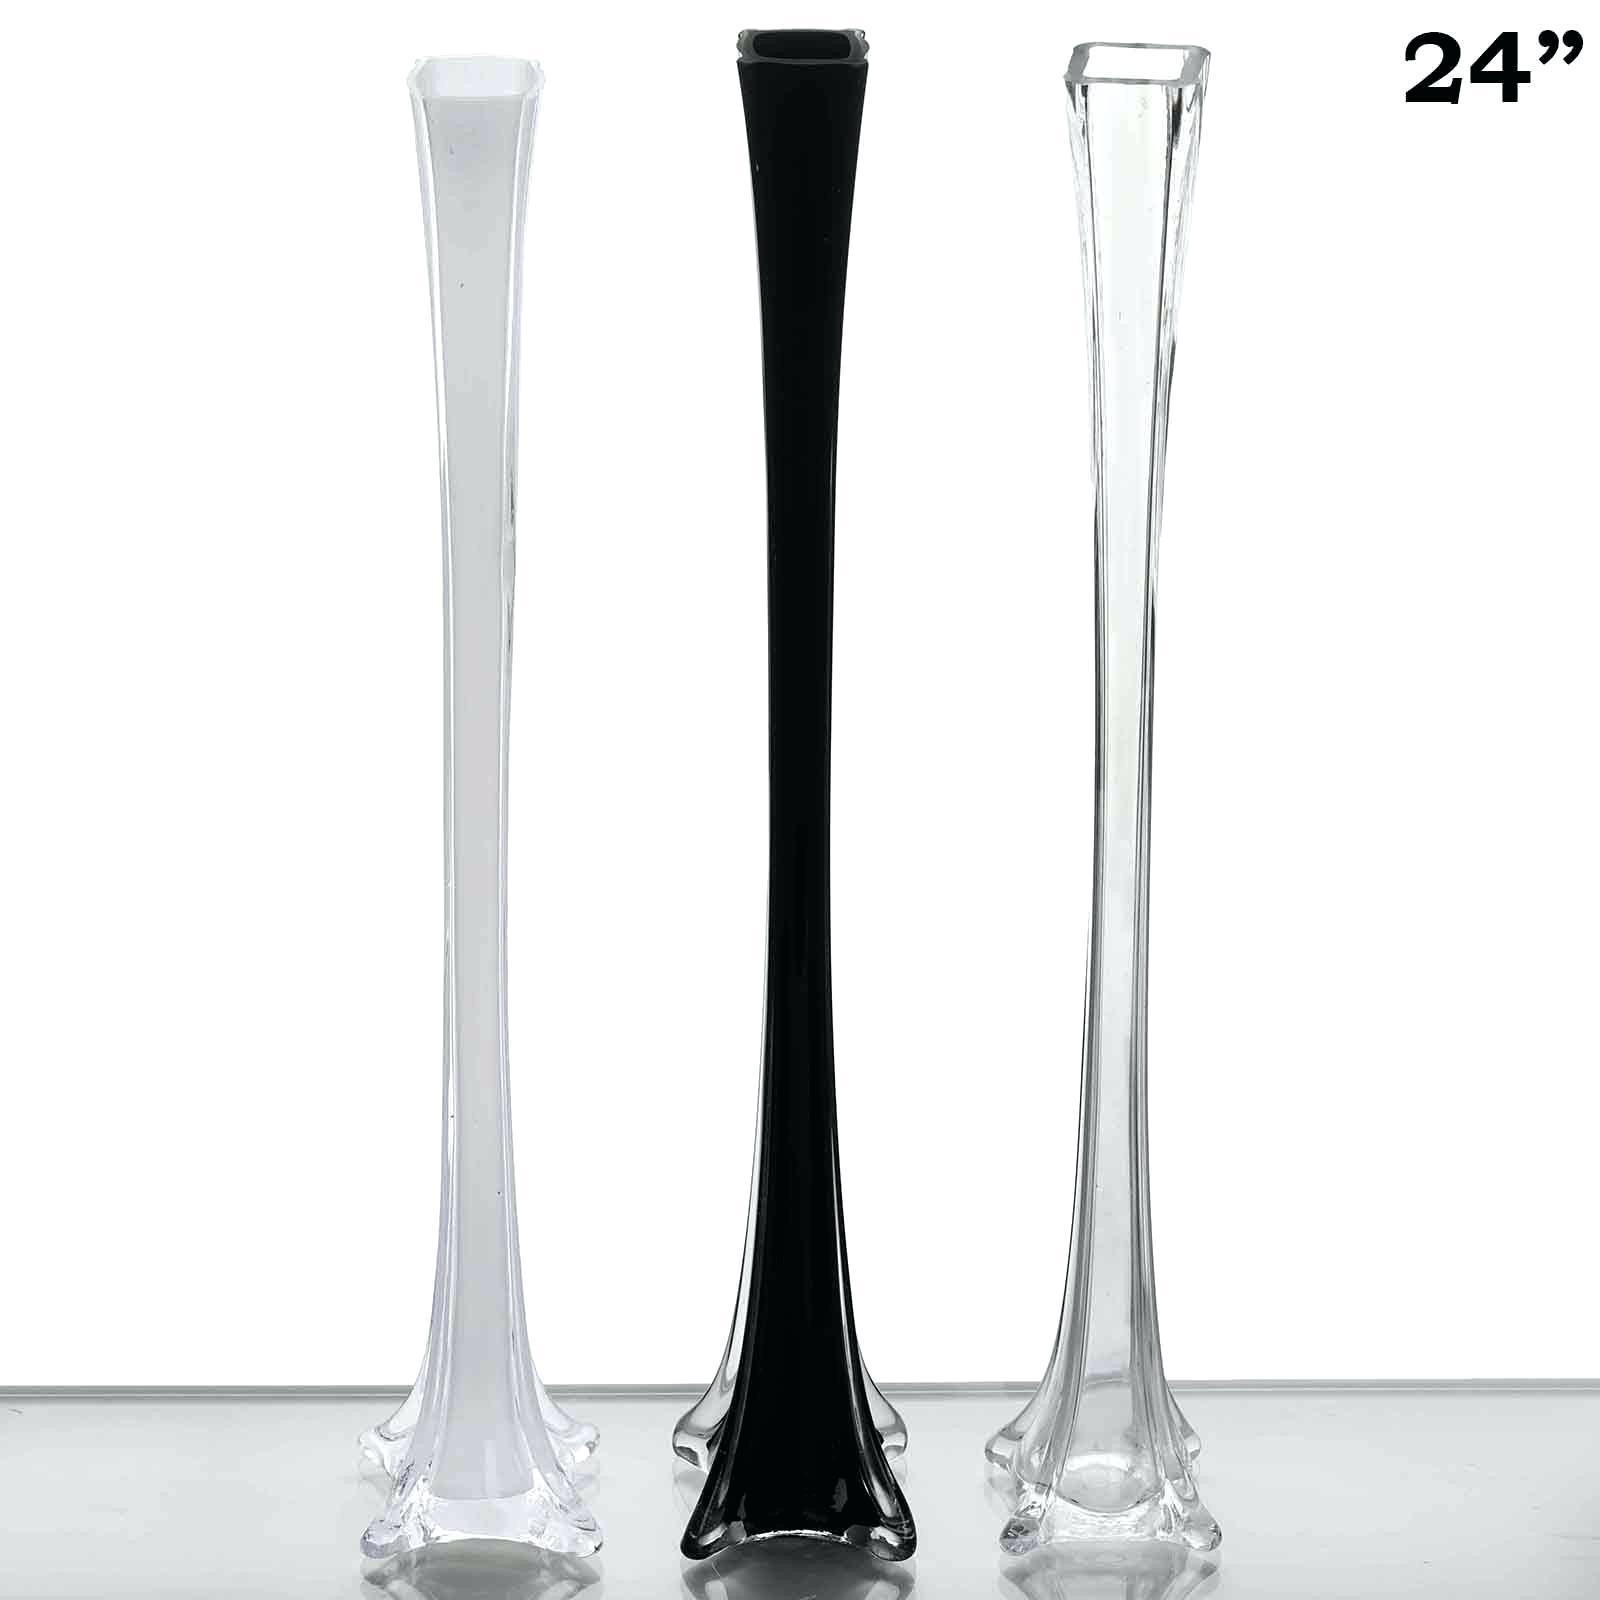 3 foot tall glass vases of glass vases with lids gallery living room glass vase fresh 2h vases for glass vases with lids images fantastic chair decor ideas from living room vases wholesale awesome of